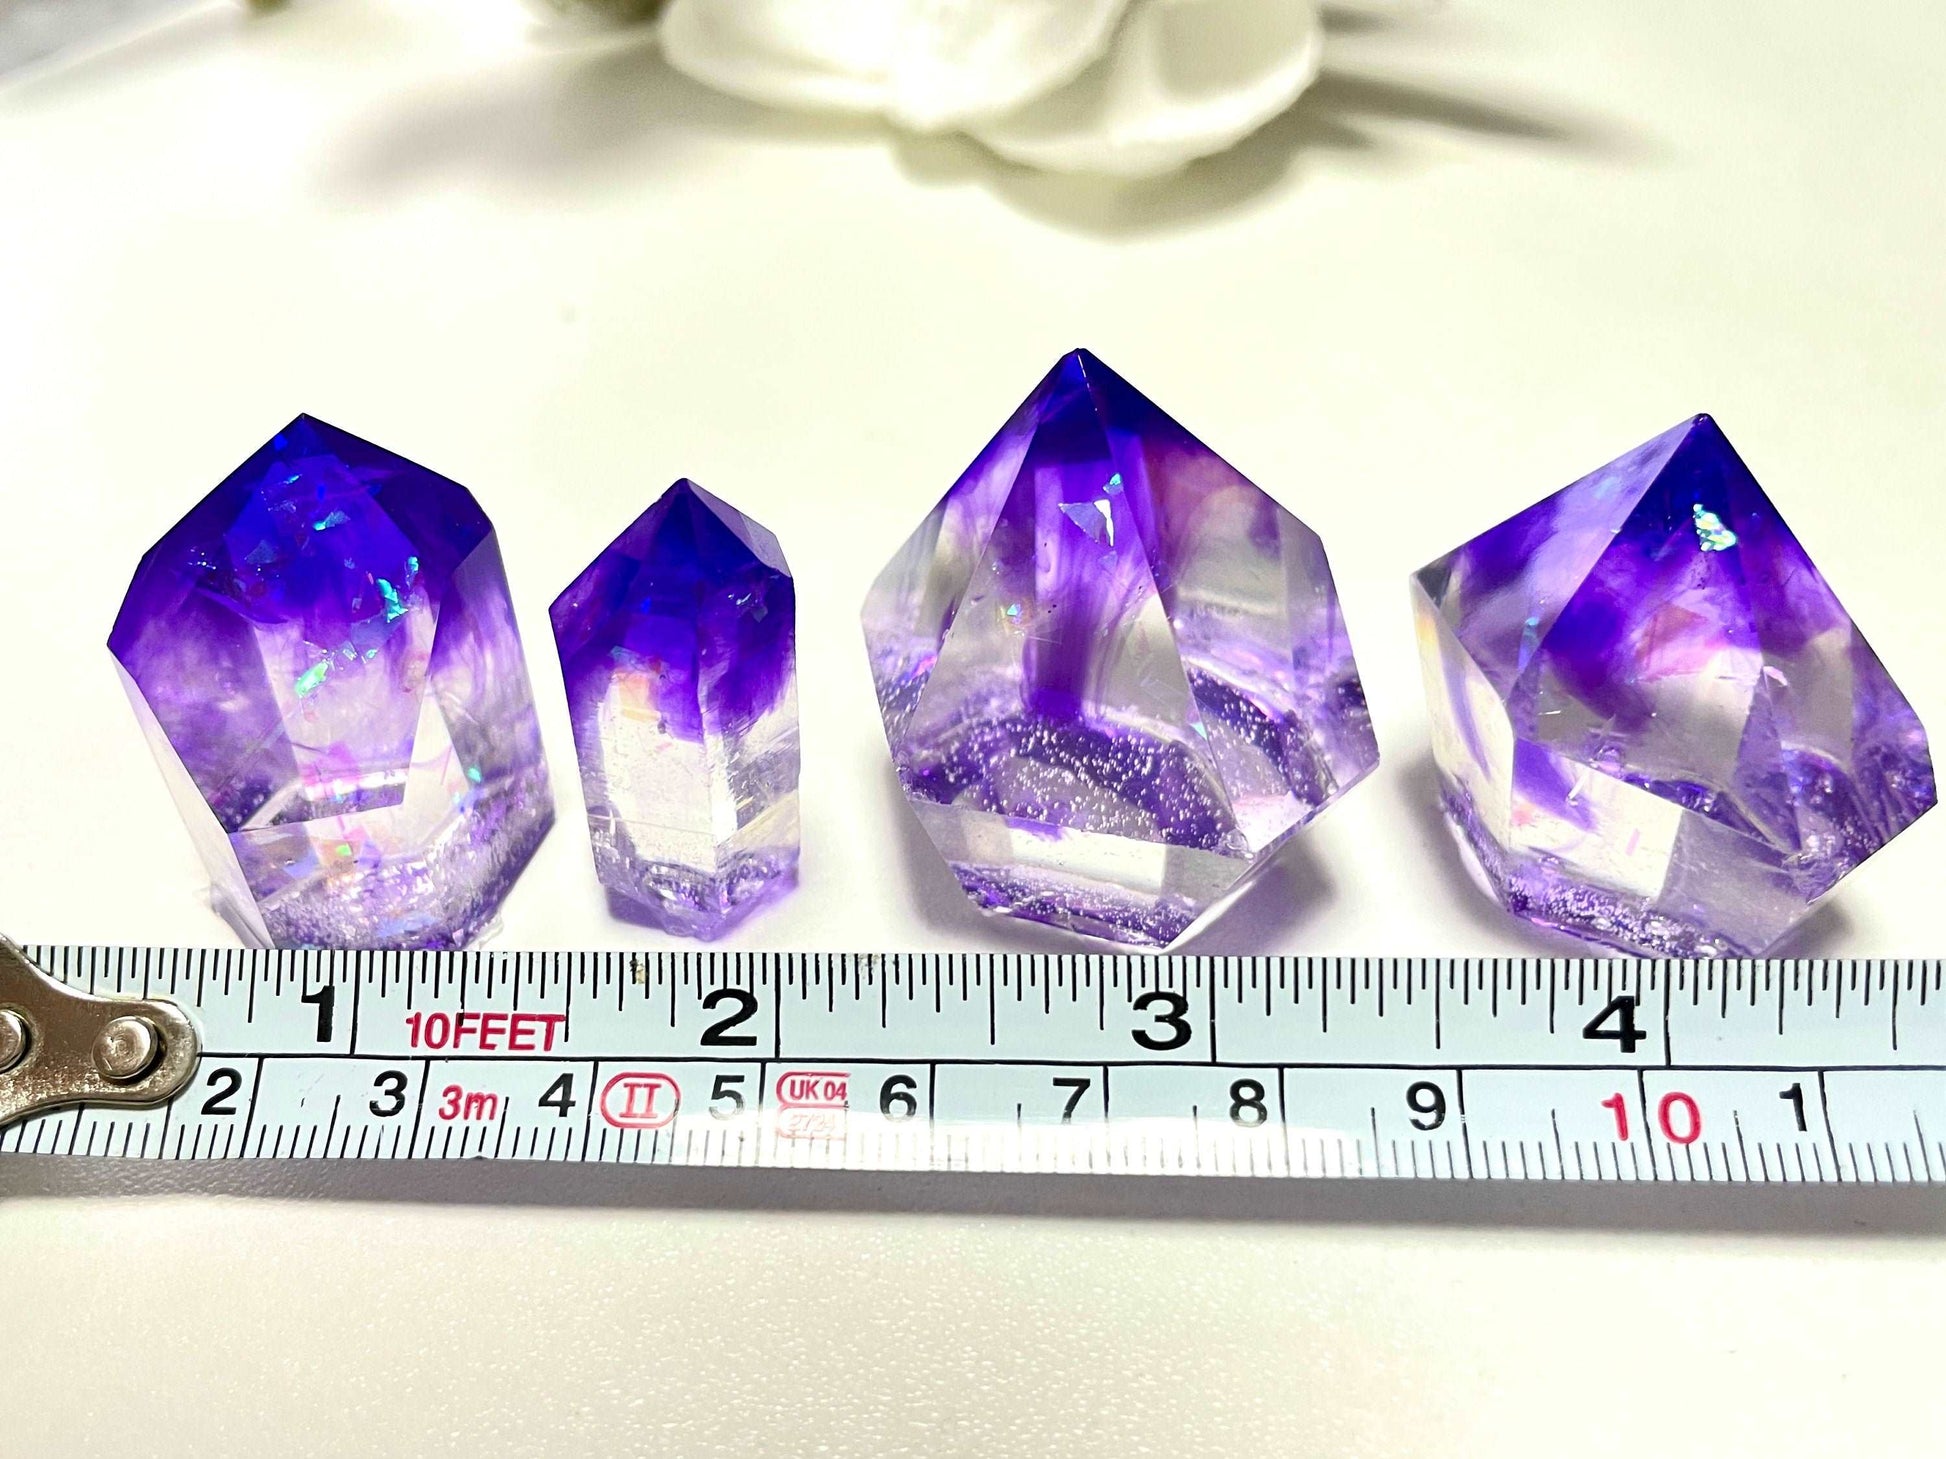 4 Large Amethyst Crystals Silicone mold. Stone mold art stone mold jewelry mold crystal personalized gifts handmade jewelry jewellery making